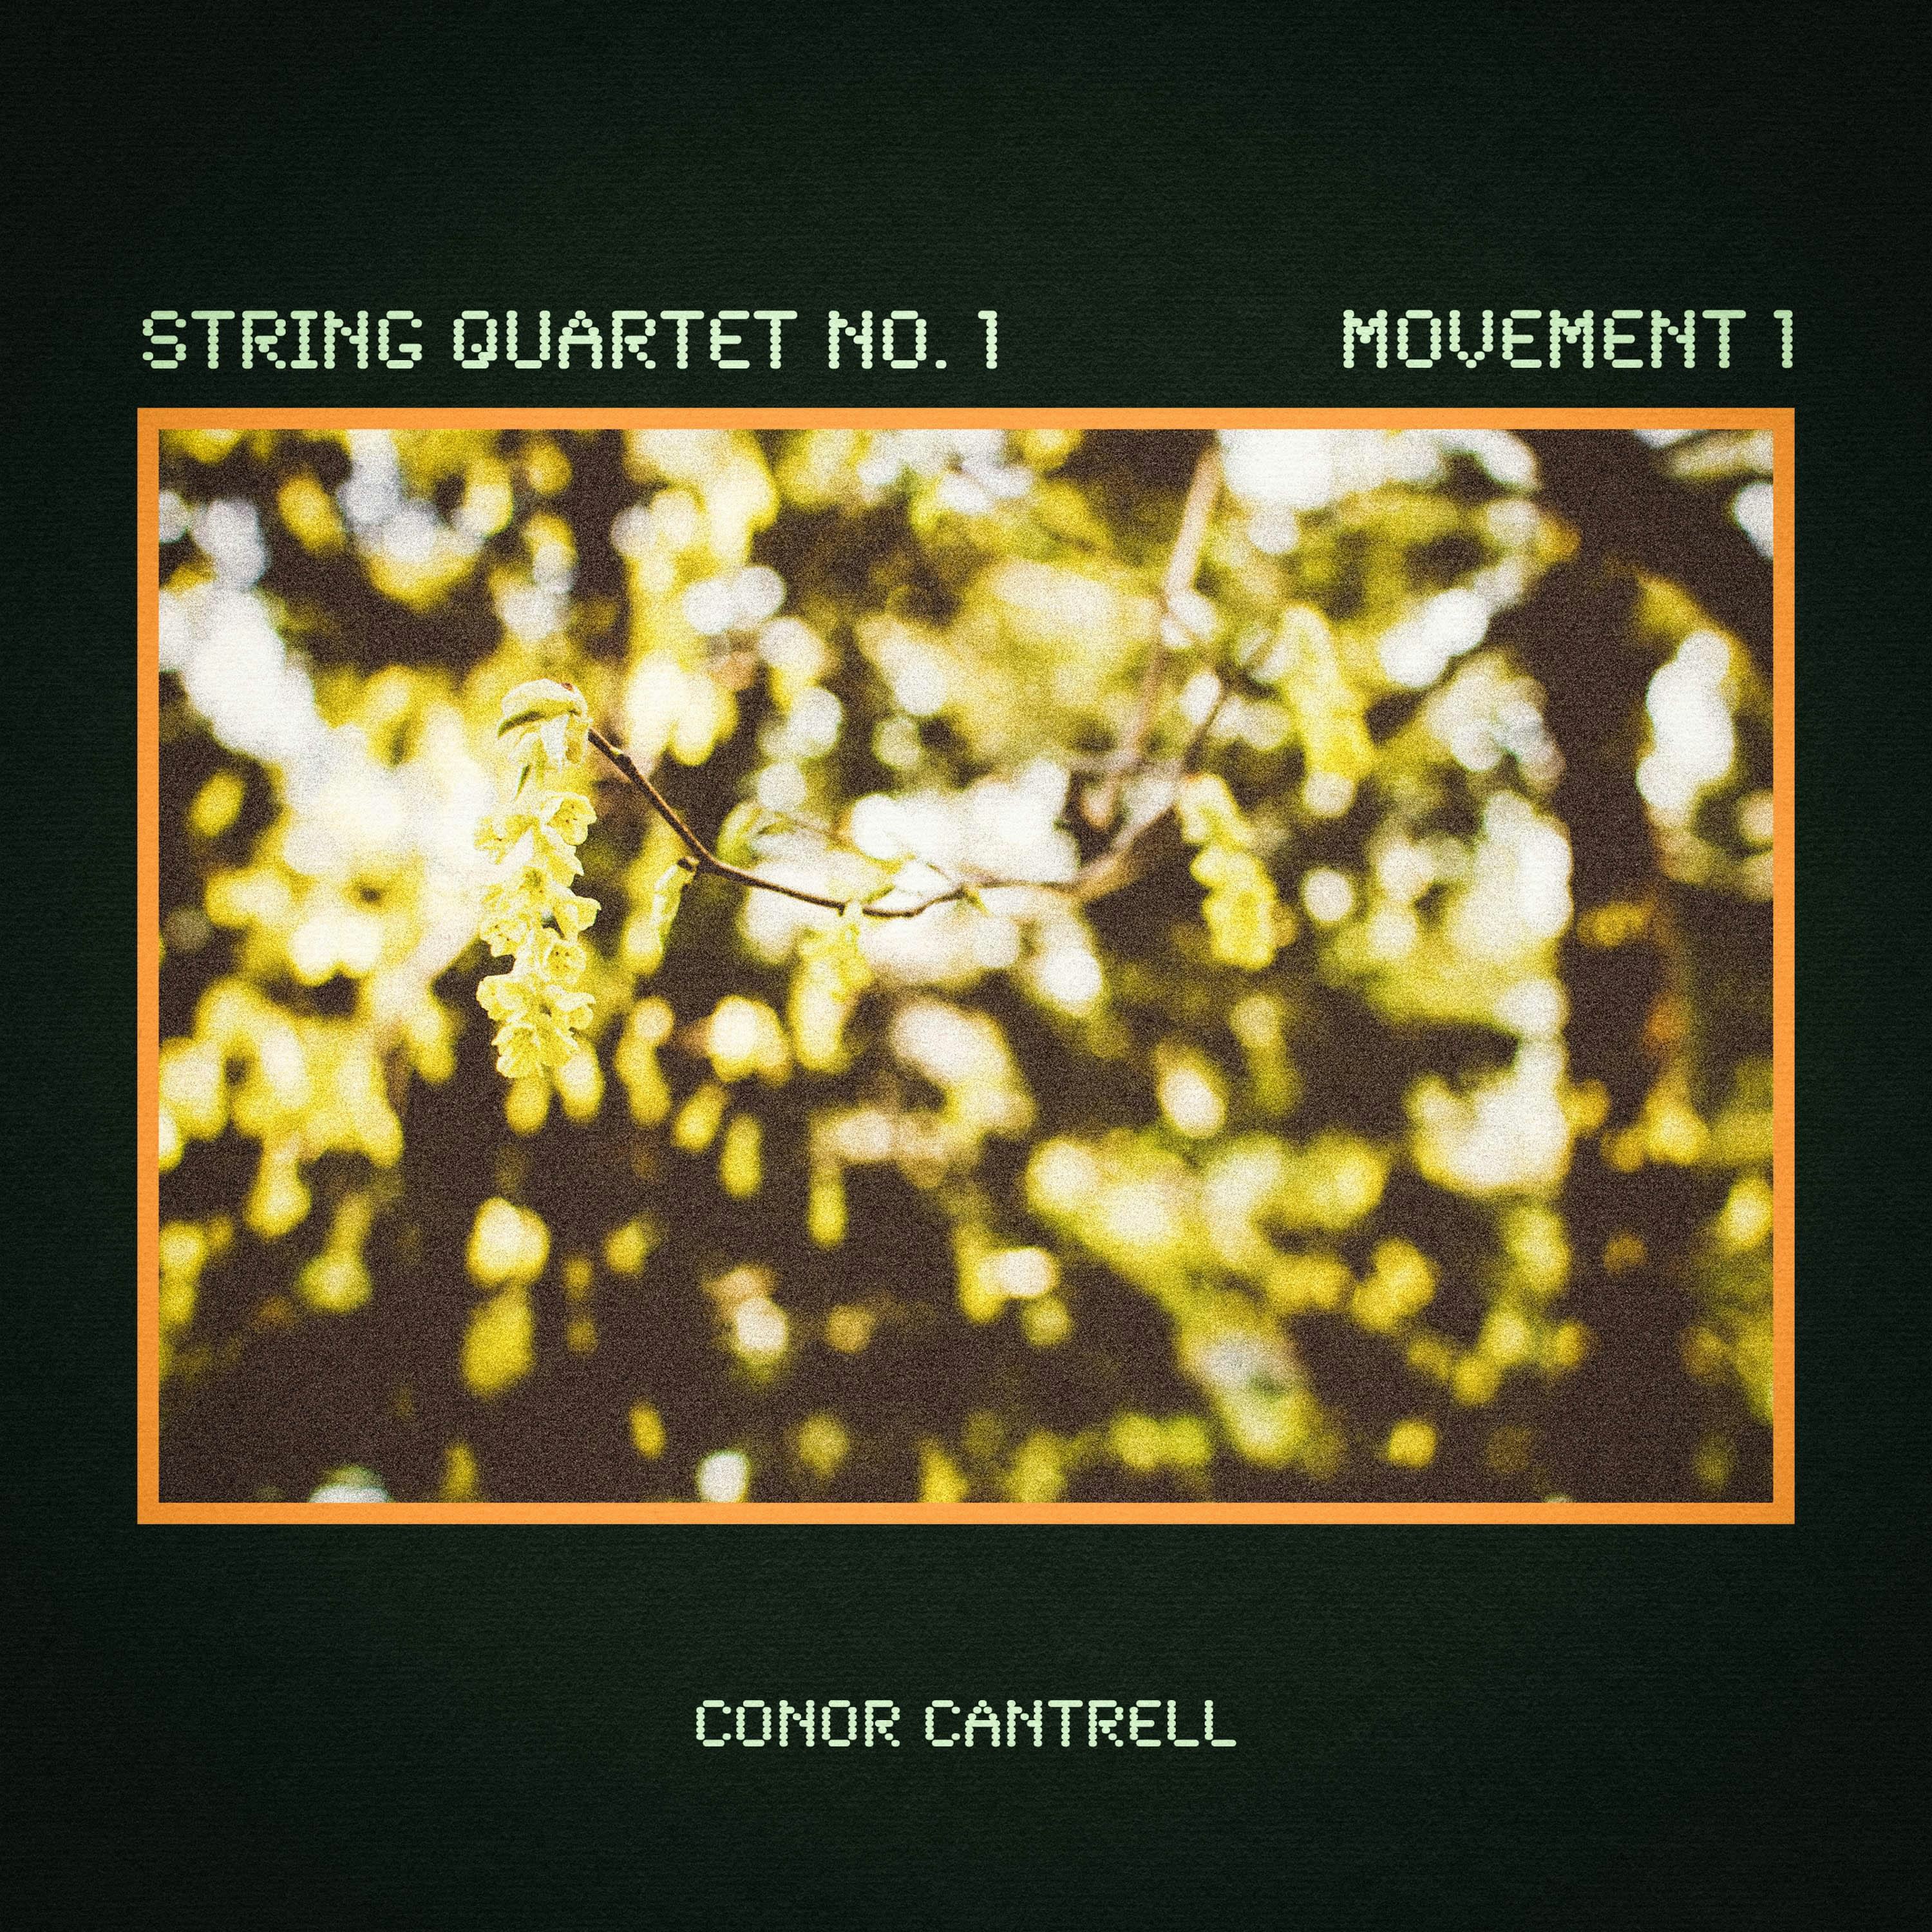 Cover art for String Quartet No. 1, Movement 1 by Conor Cantrell